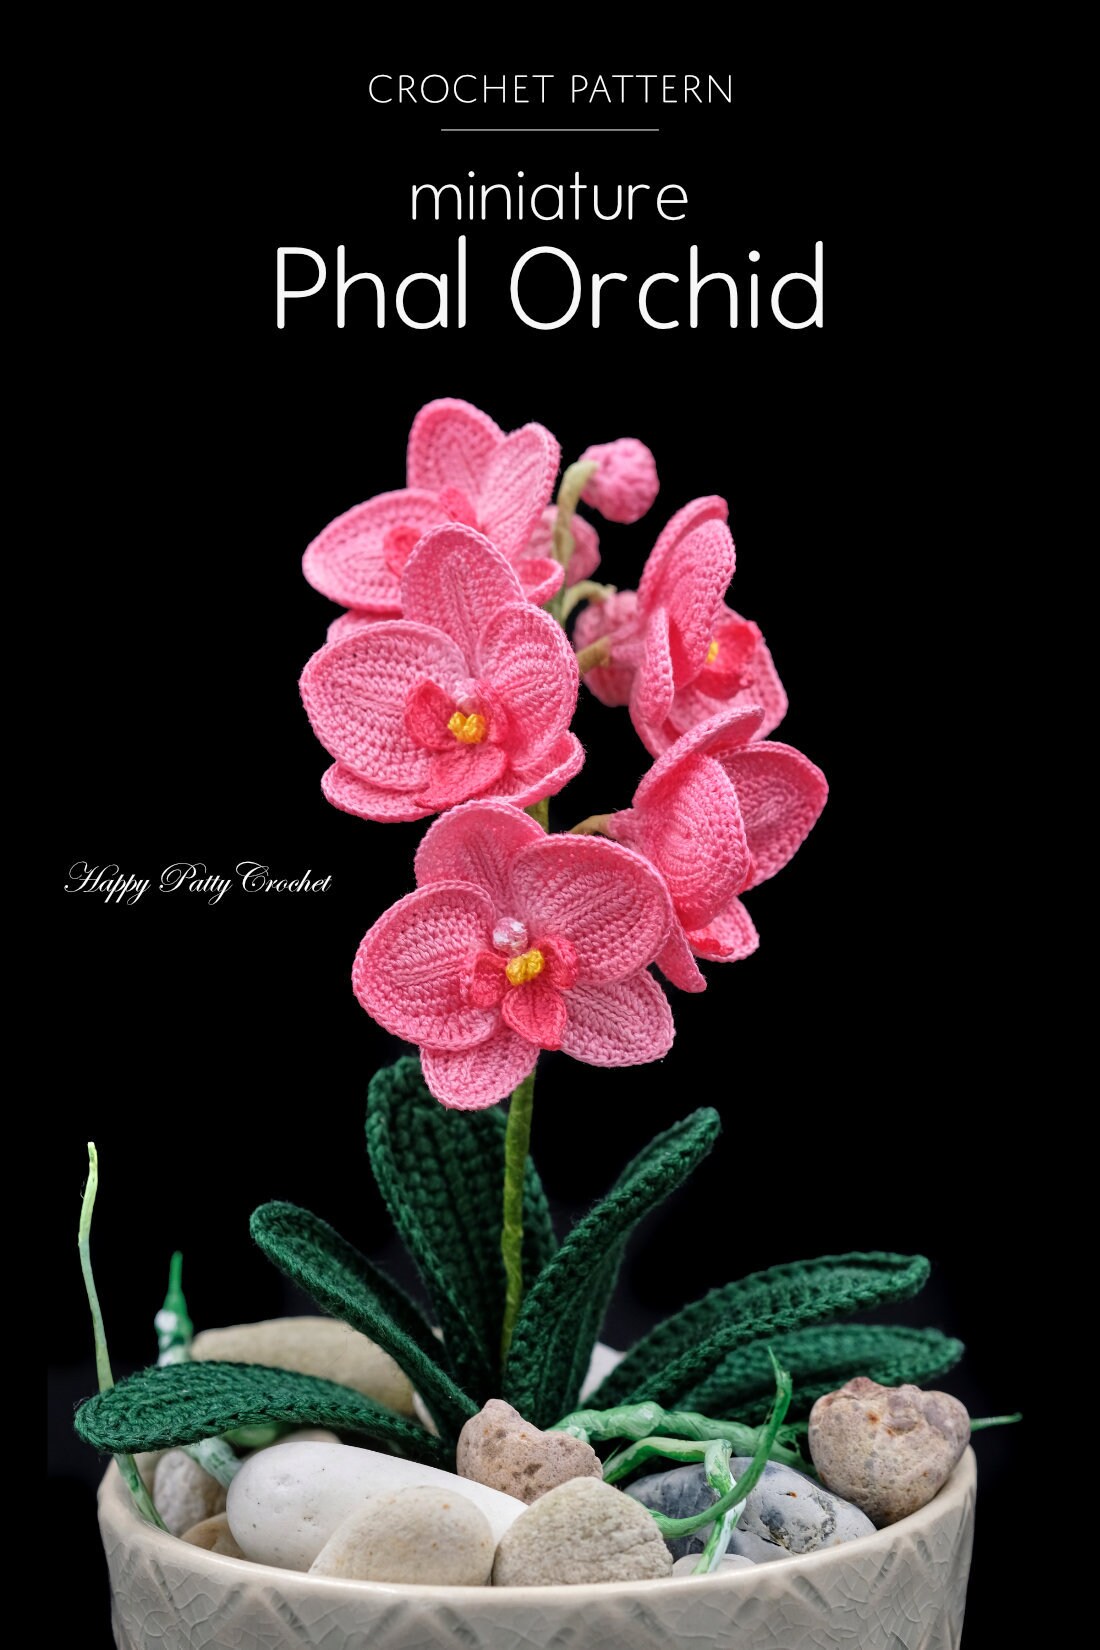 Crochet Pattern for Miniature Phal Orchid - Crochet Flower Pattern for Small Moth Orchids